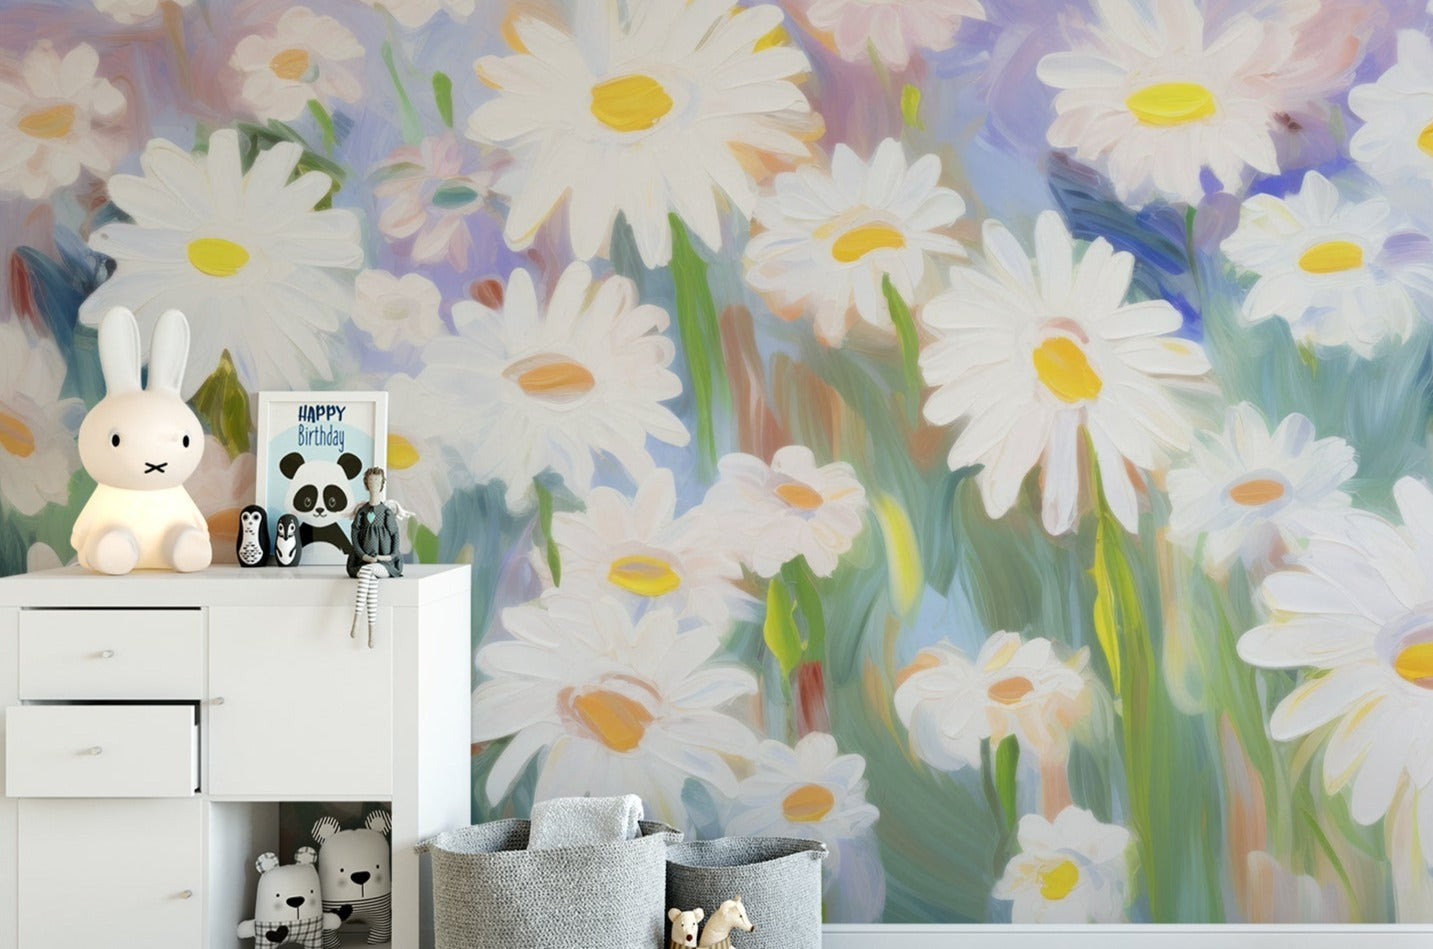 "Bright and Colorful Daisy Mural in Modern Children's Room with White Furniture and Plush Toys"